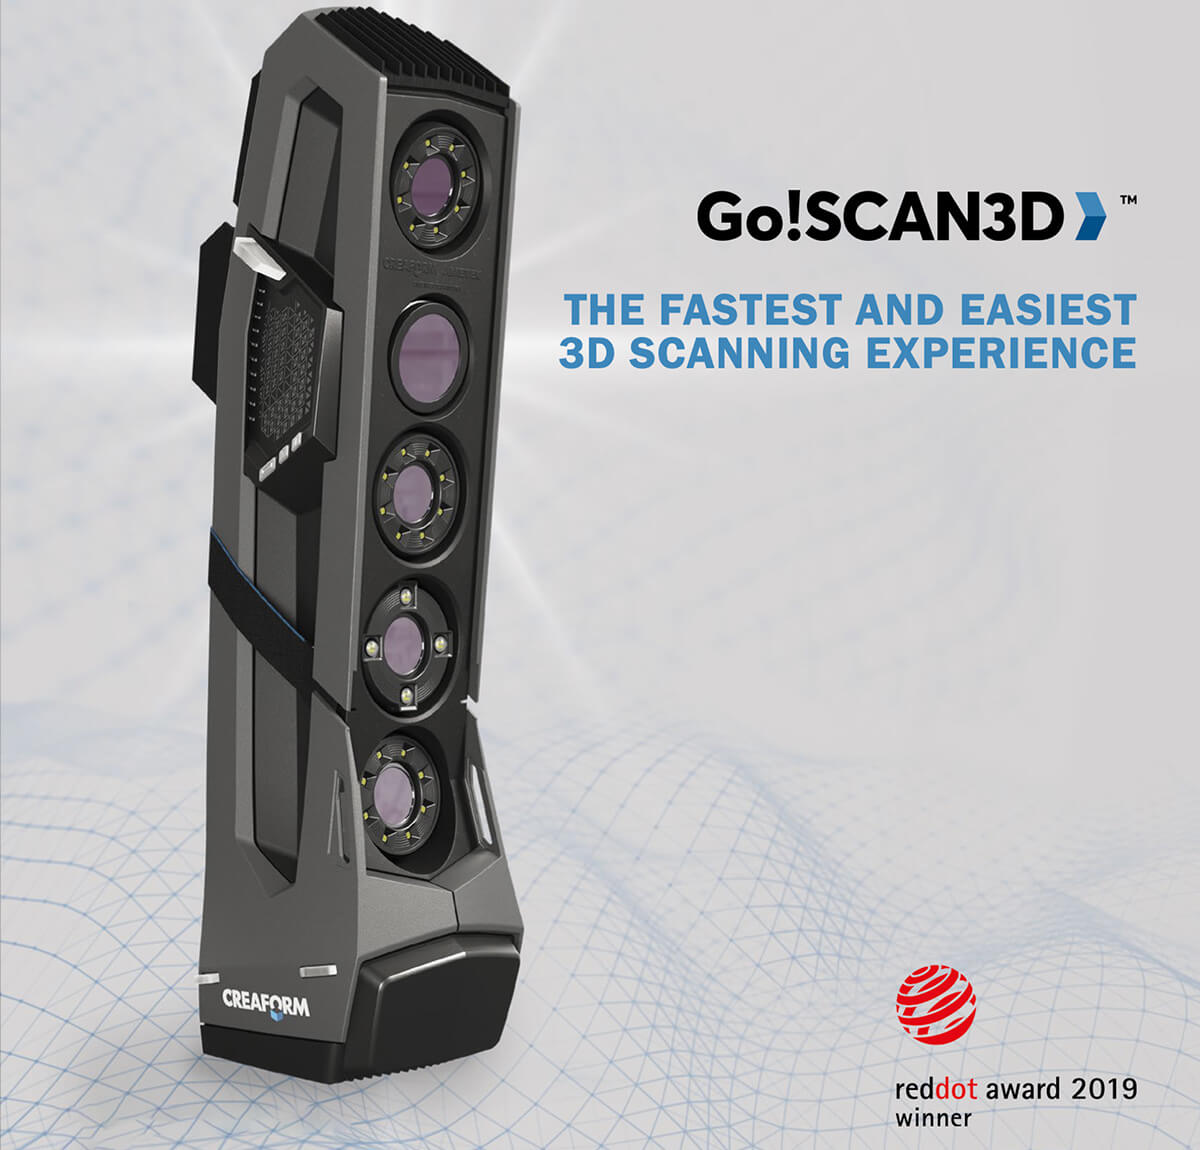 Go!Scan3d The Fastest and easiest 3D scanning expereince. Red dot award 2019 winner